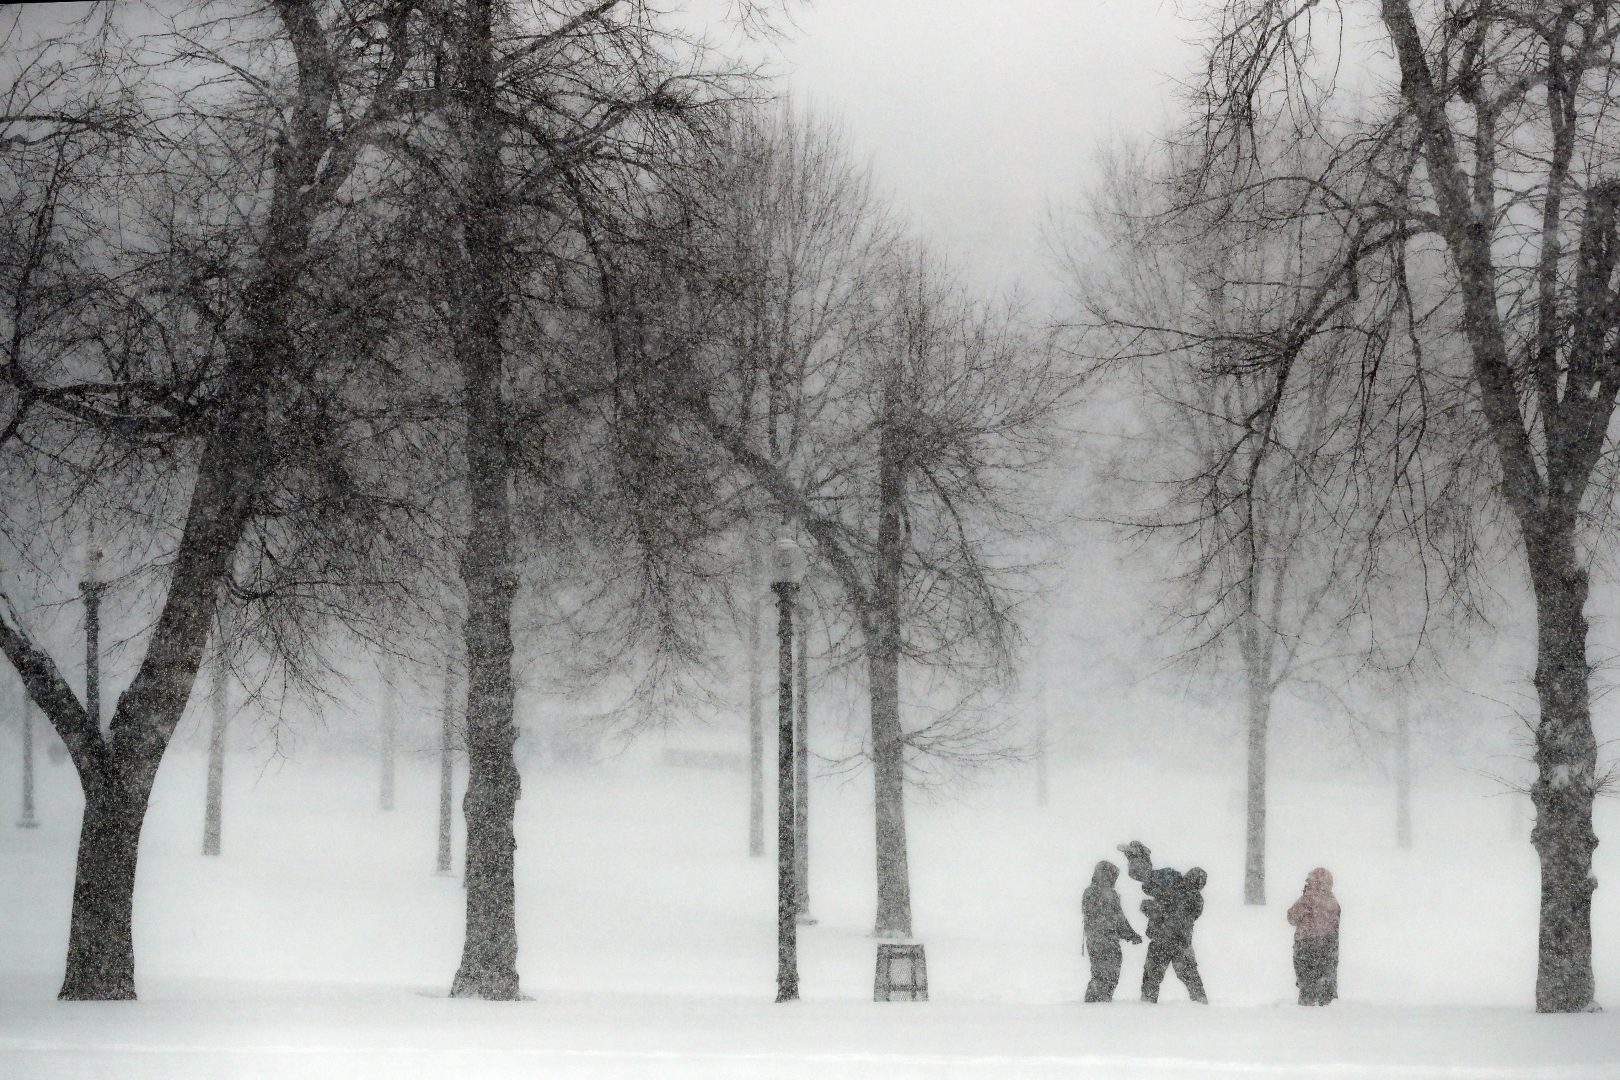 Snow falls on Boston Common, Saturday, Jan. 29, 2022, in Boston. Forecasters watched closely for new snowfall records, especially in Boston, where the heaviest snow was expected late Saturday. (AP Photo/Michael Dwyer)